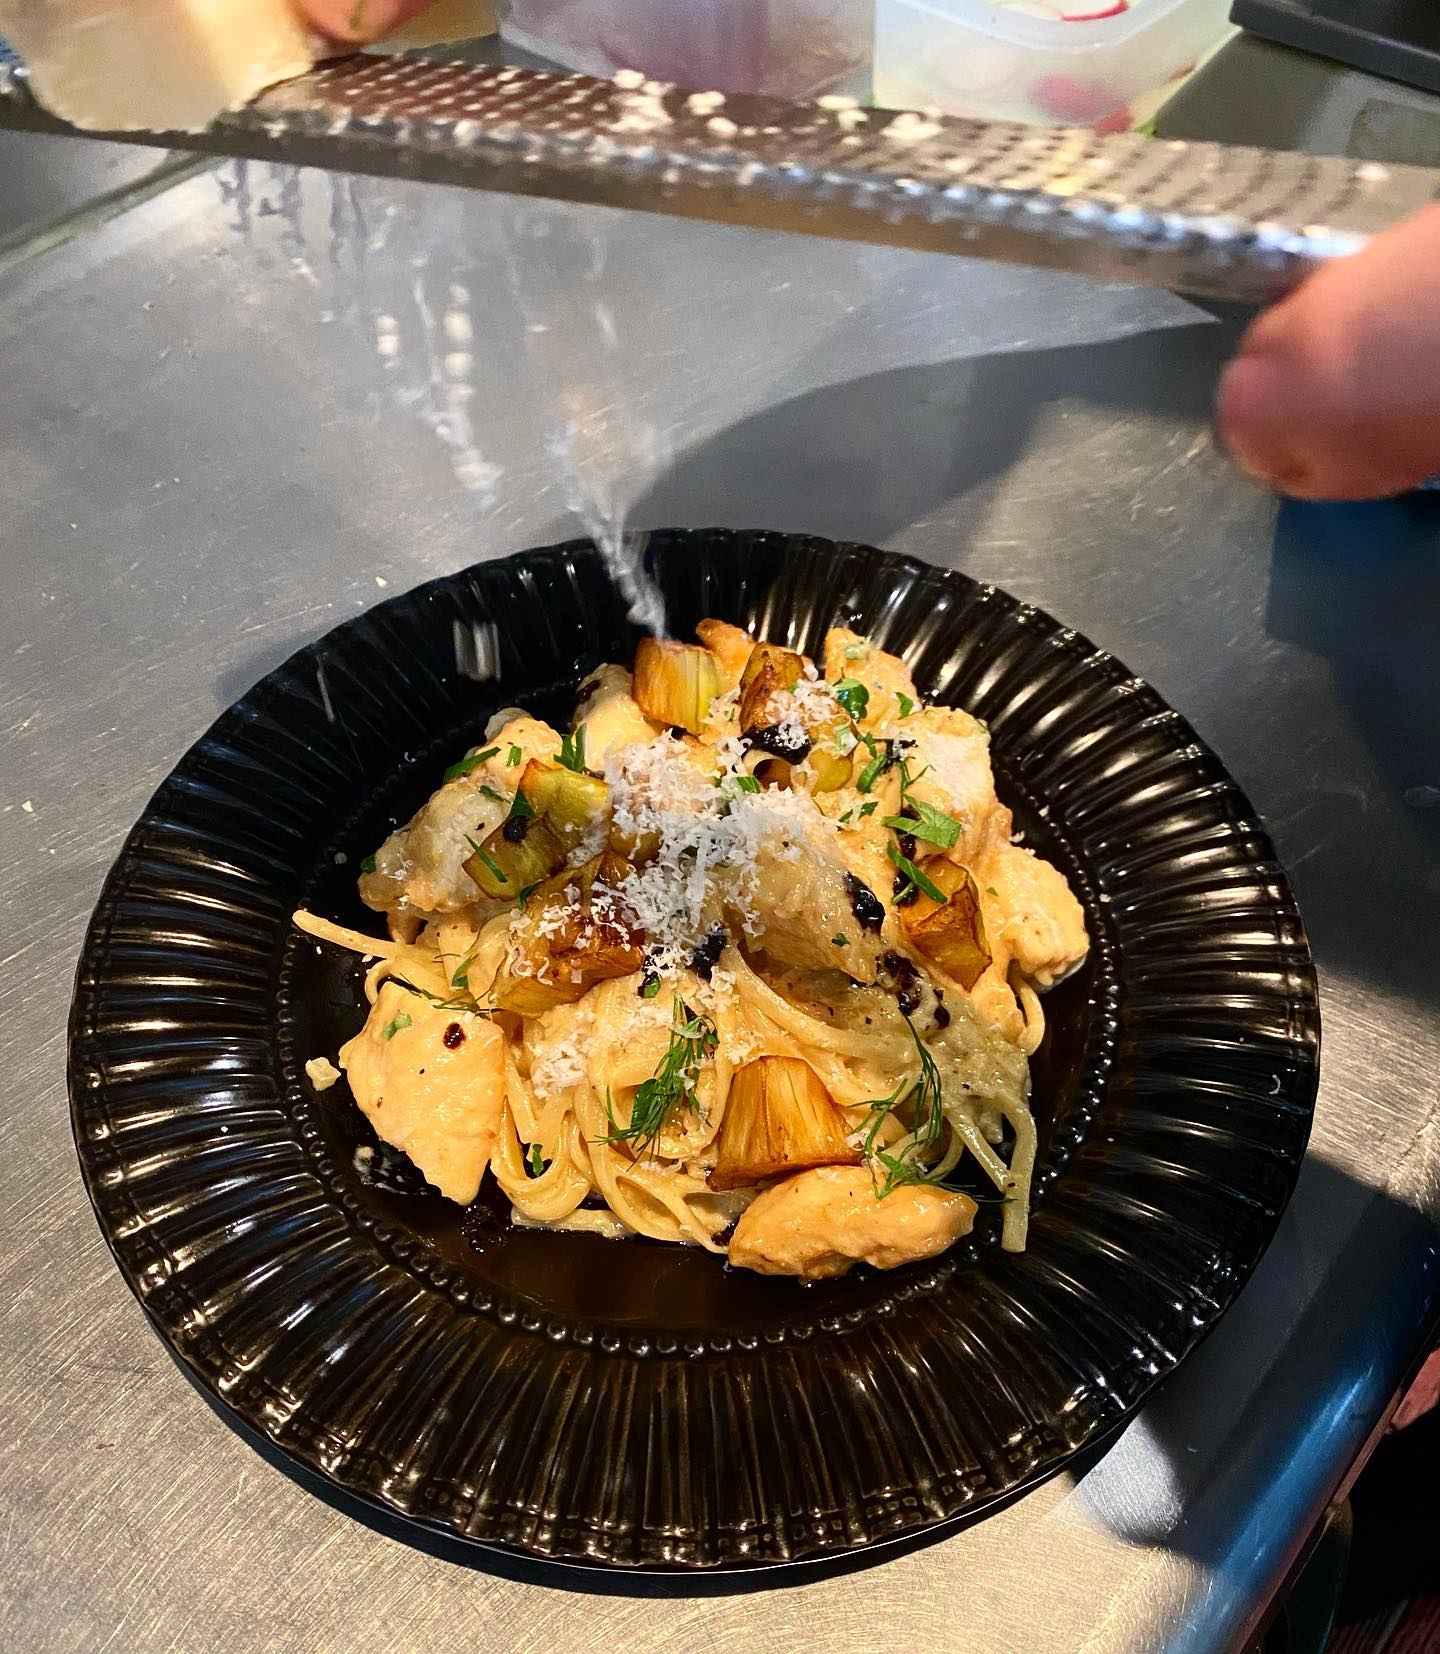 Chicken and miso cream cheese pasta are a perfect match for this next special!
If you haven't tried Chef Yusuke's Japanese Italian fusion pasta, you are missing out!
Hurry!